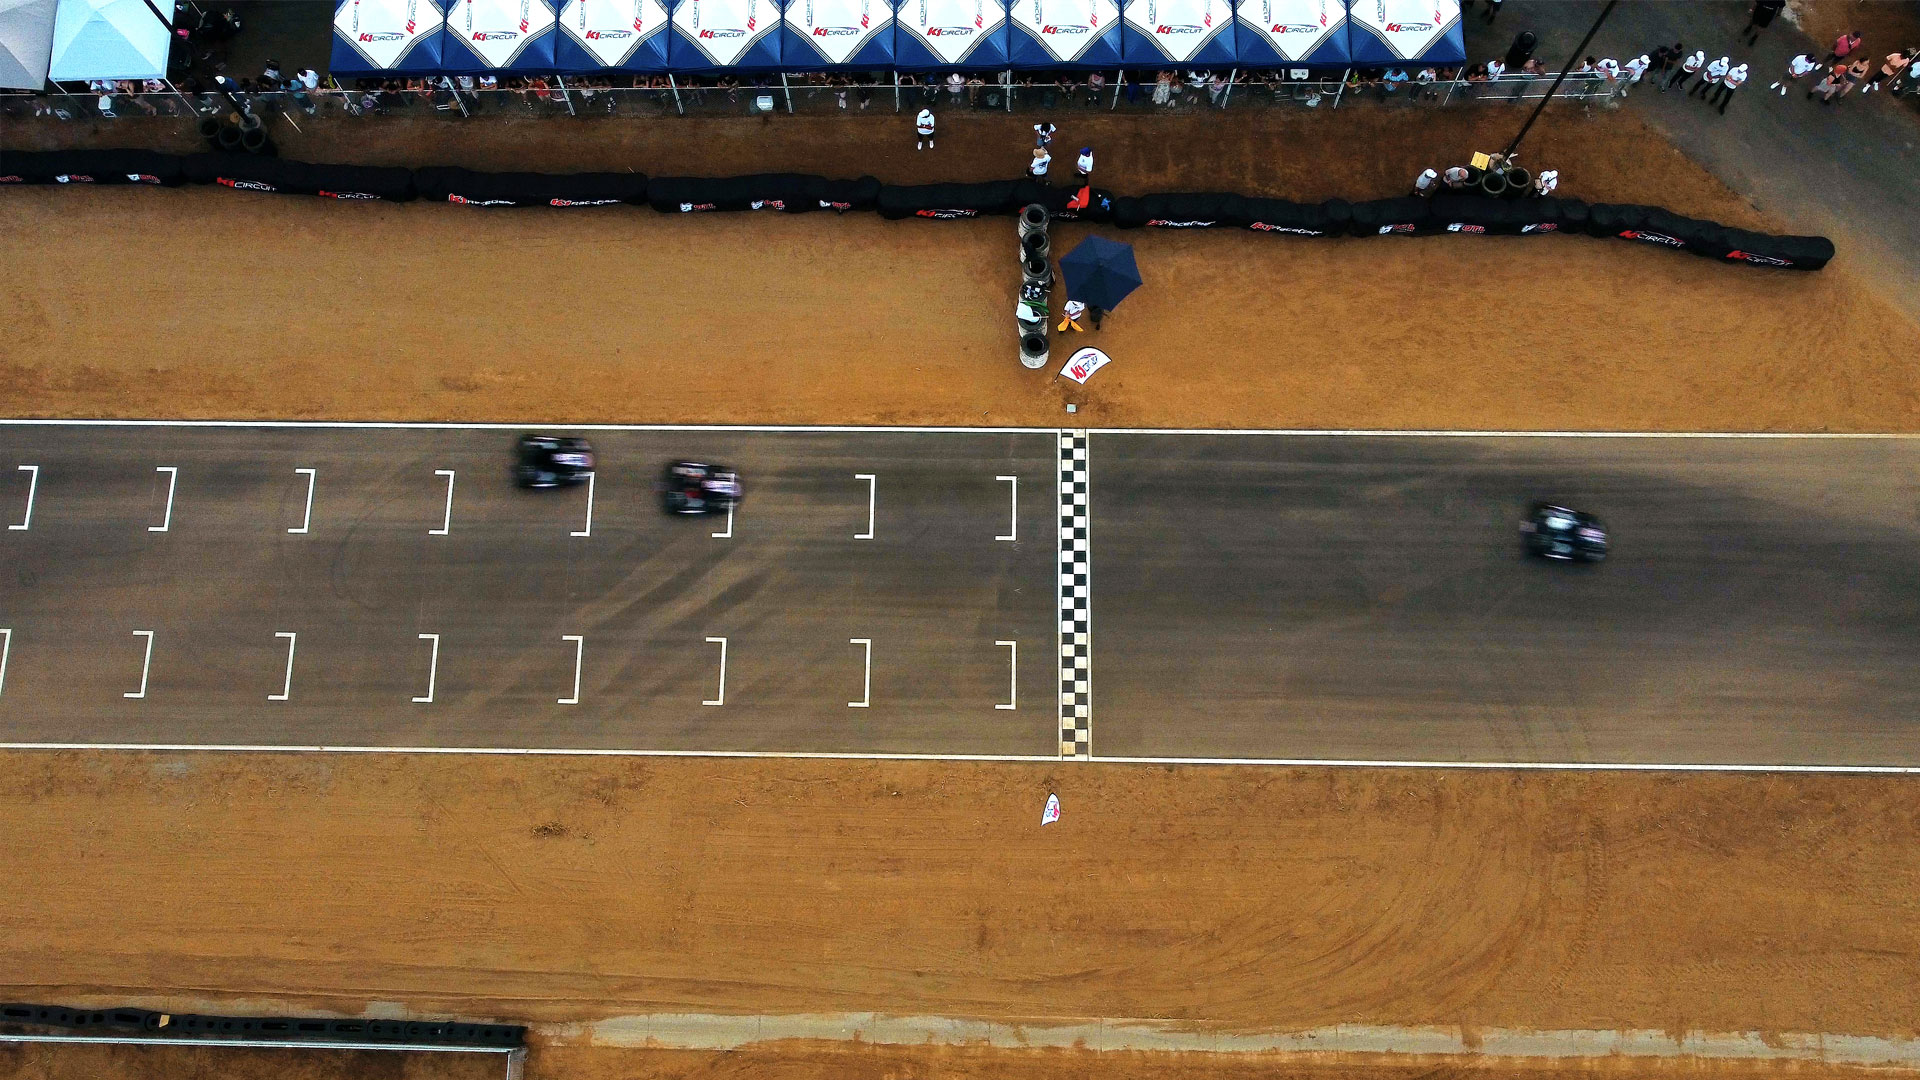 3 karts from above